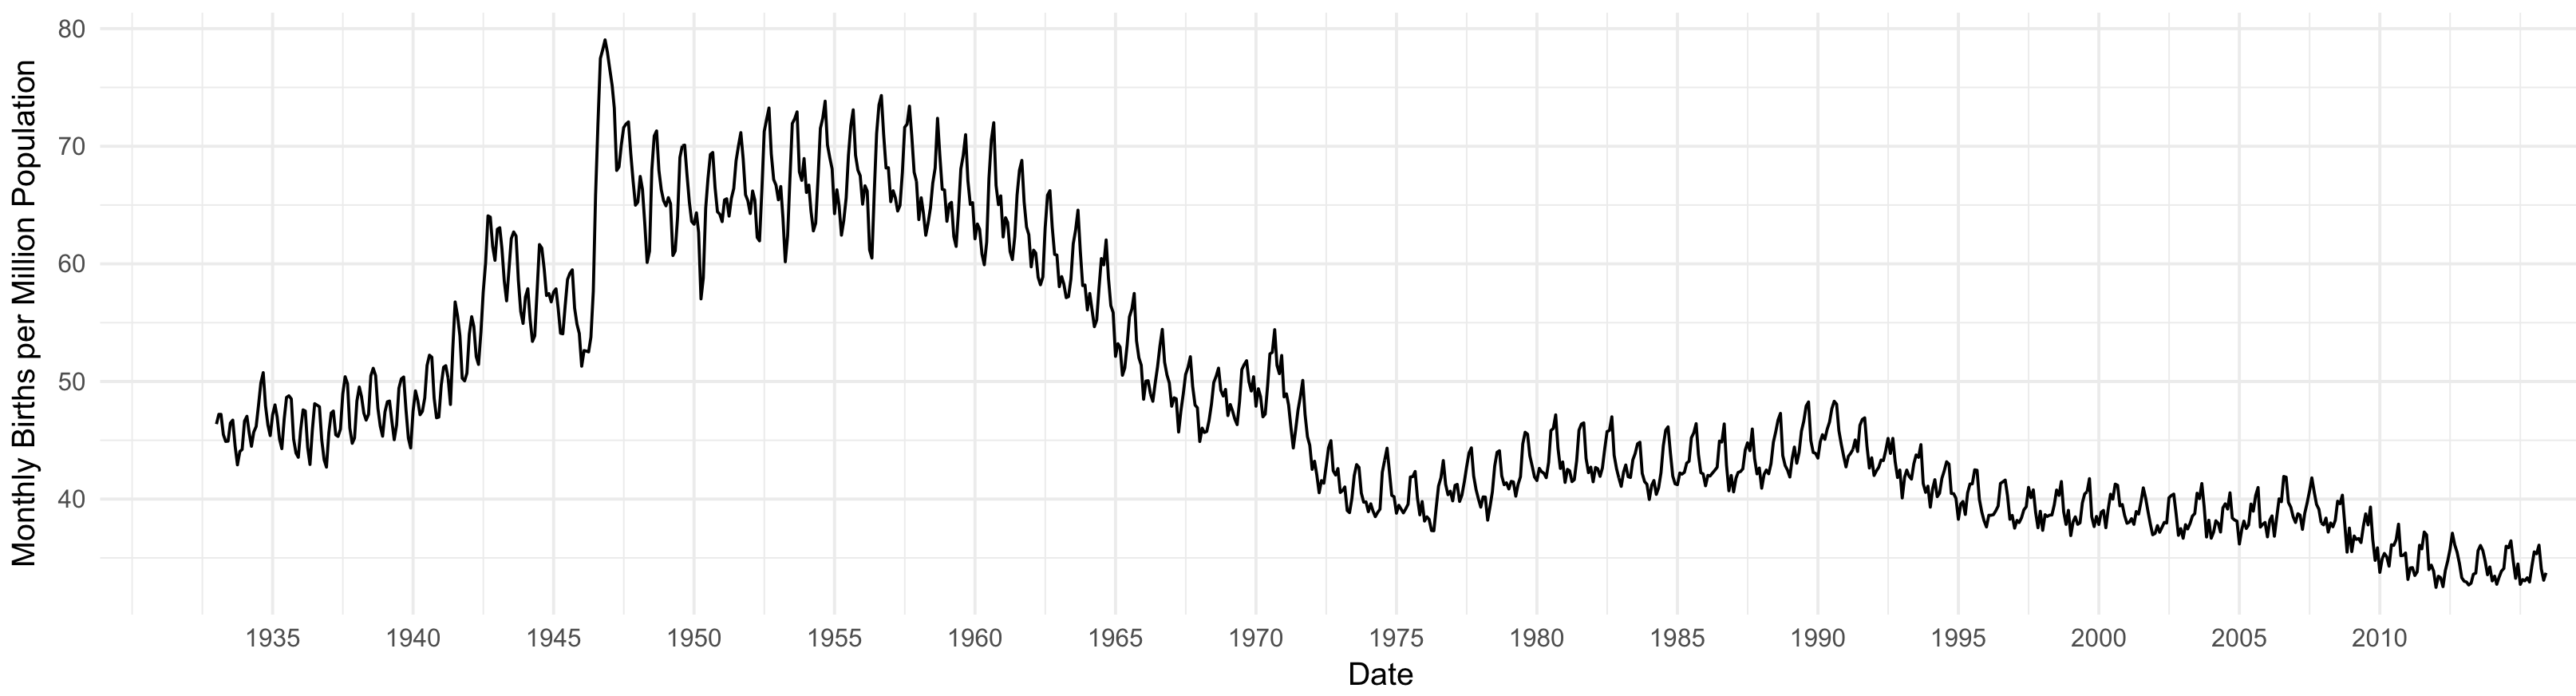 Monthy births, time series